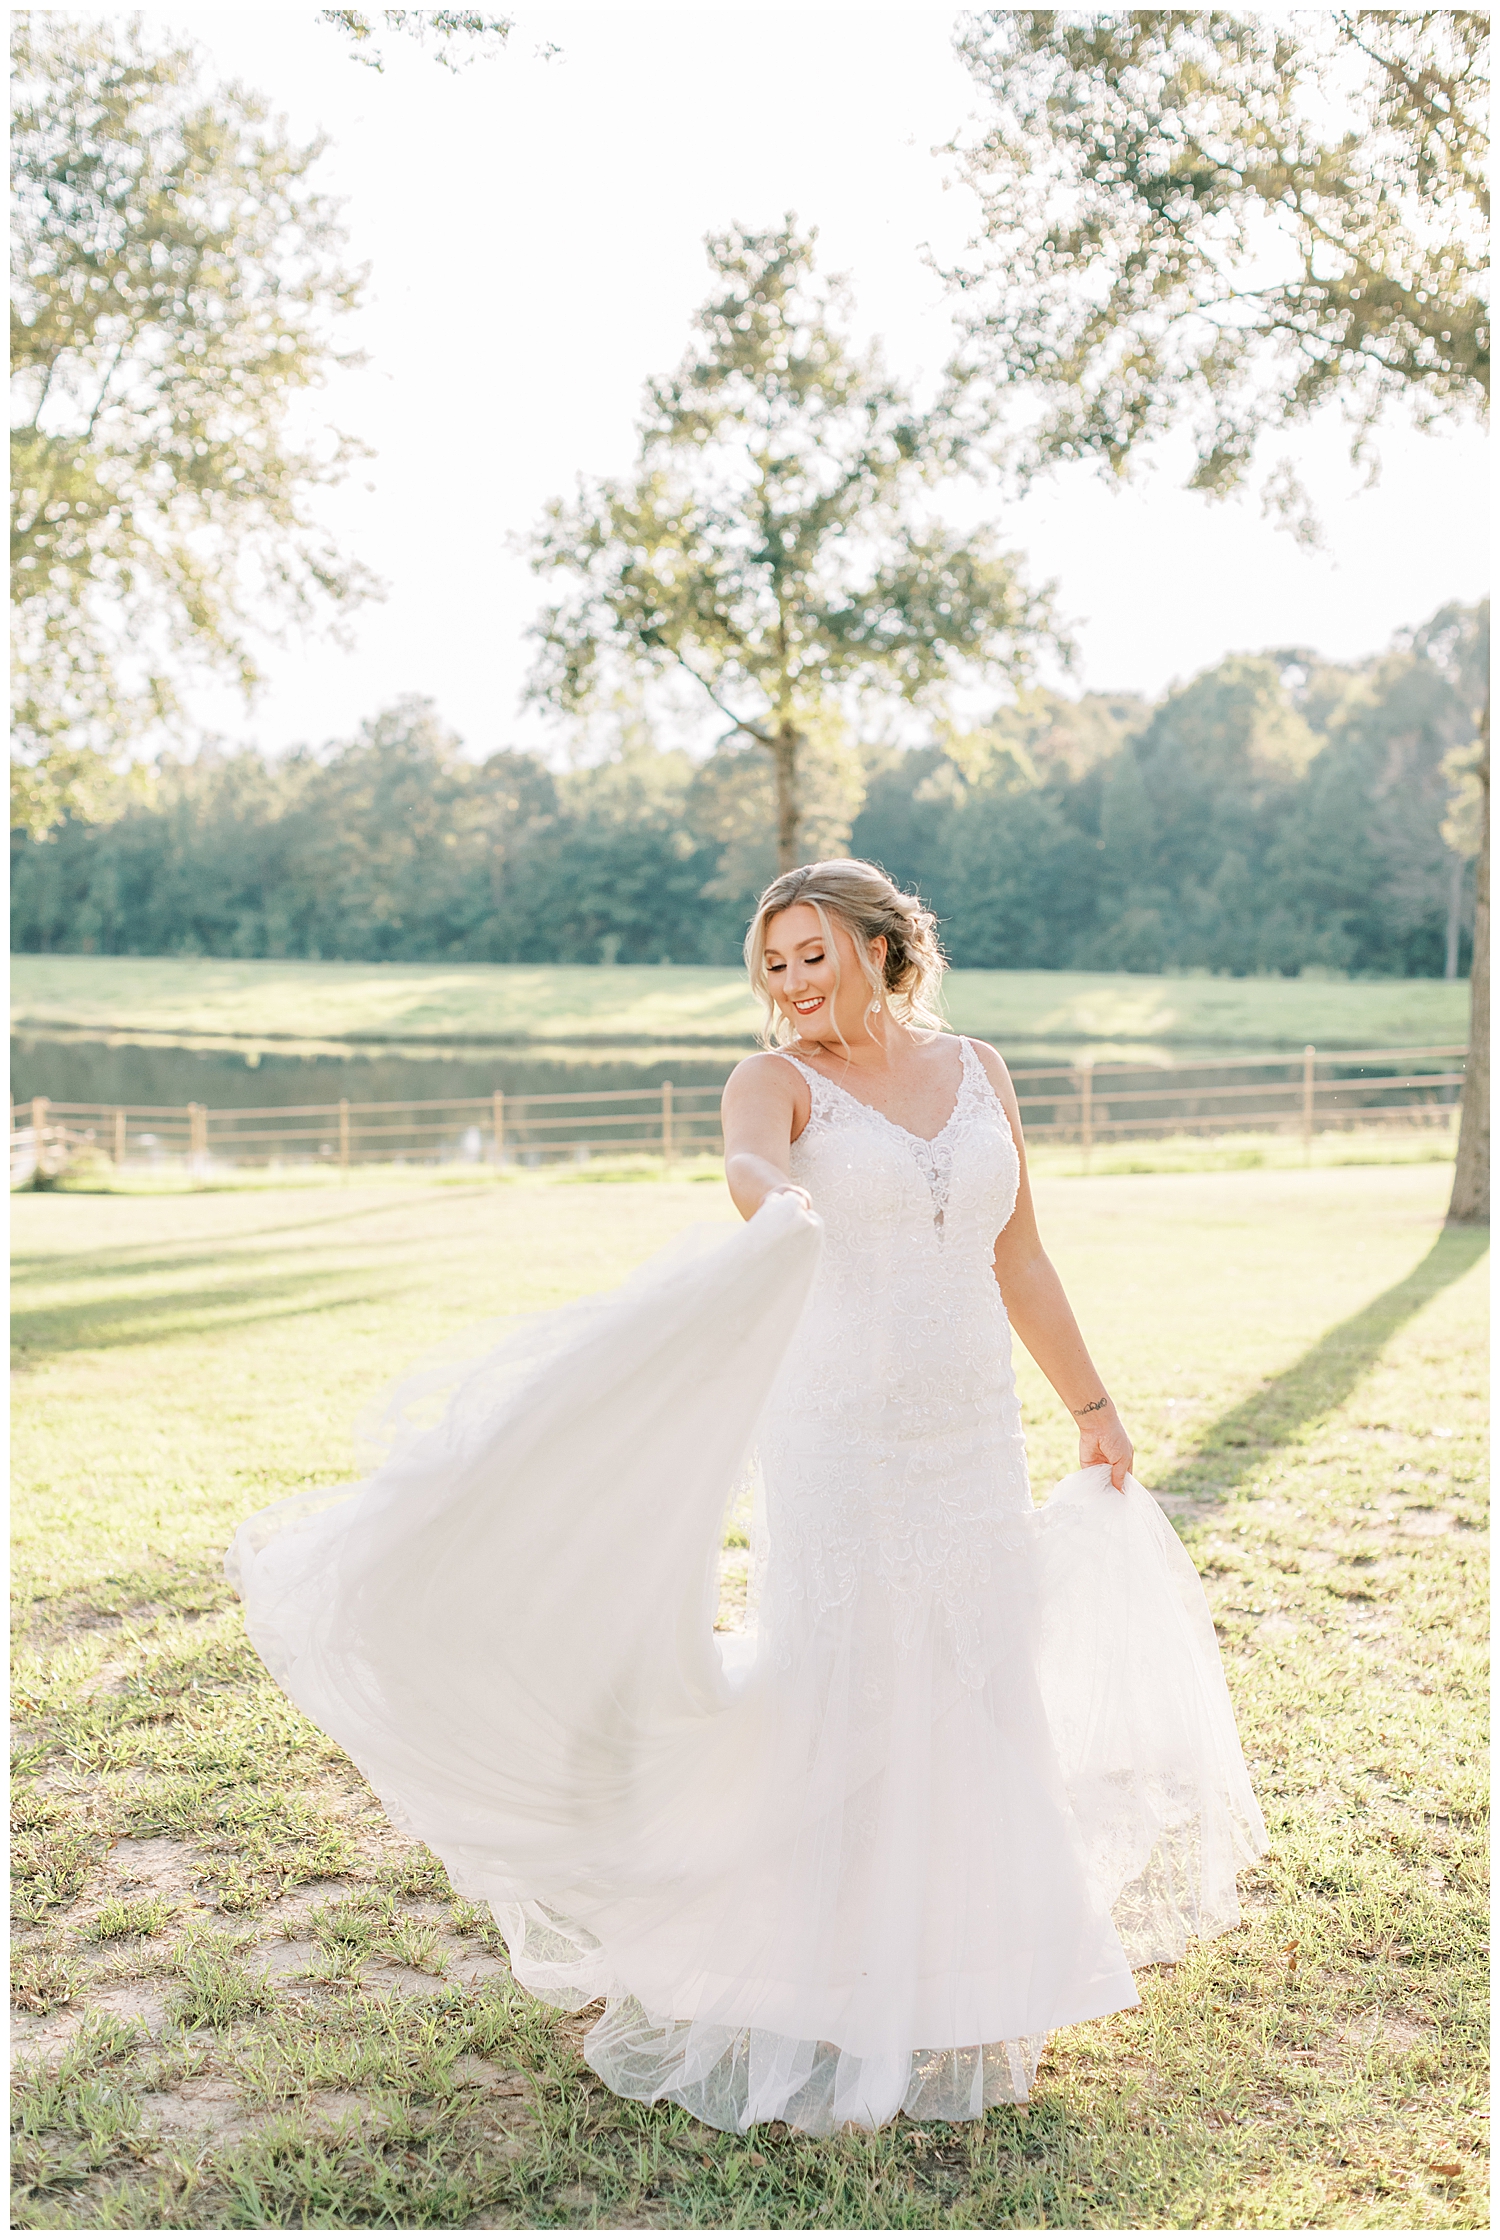 A bride twirls her dress in front of a lake.